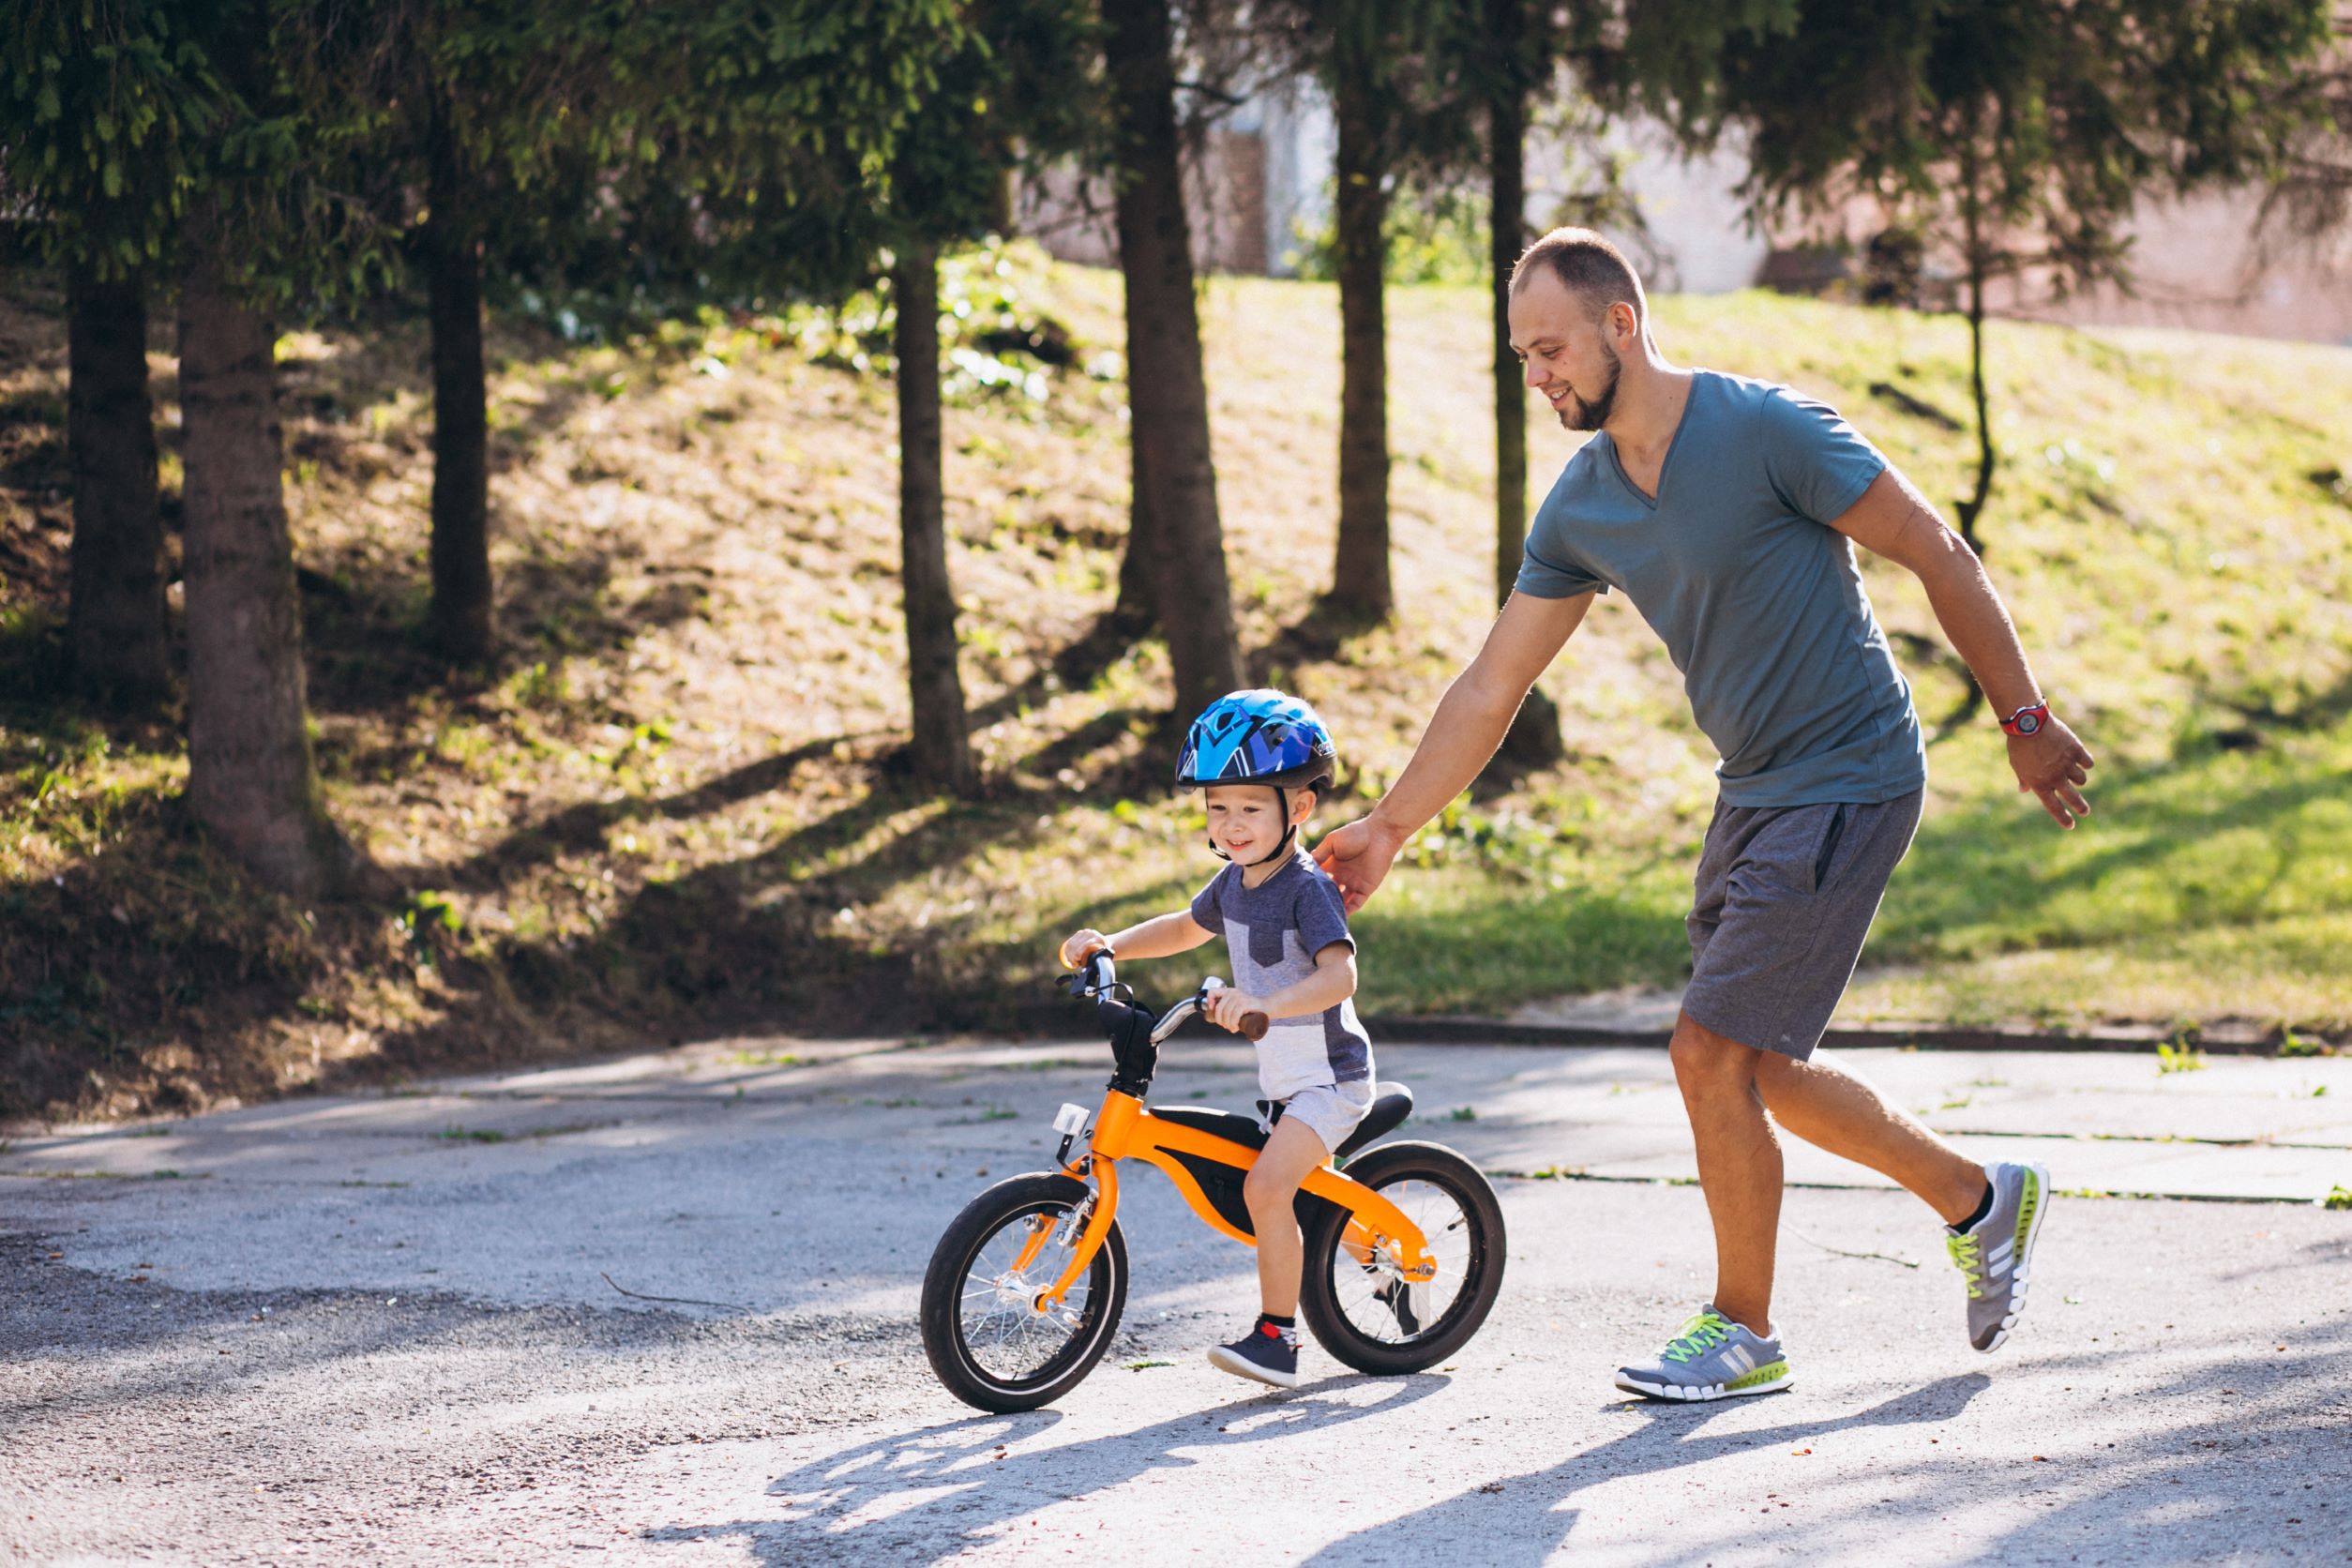 A father is gradually teaching his son to bicycle without pedals